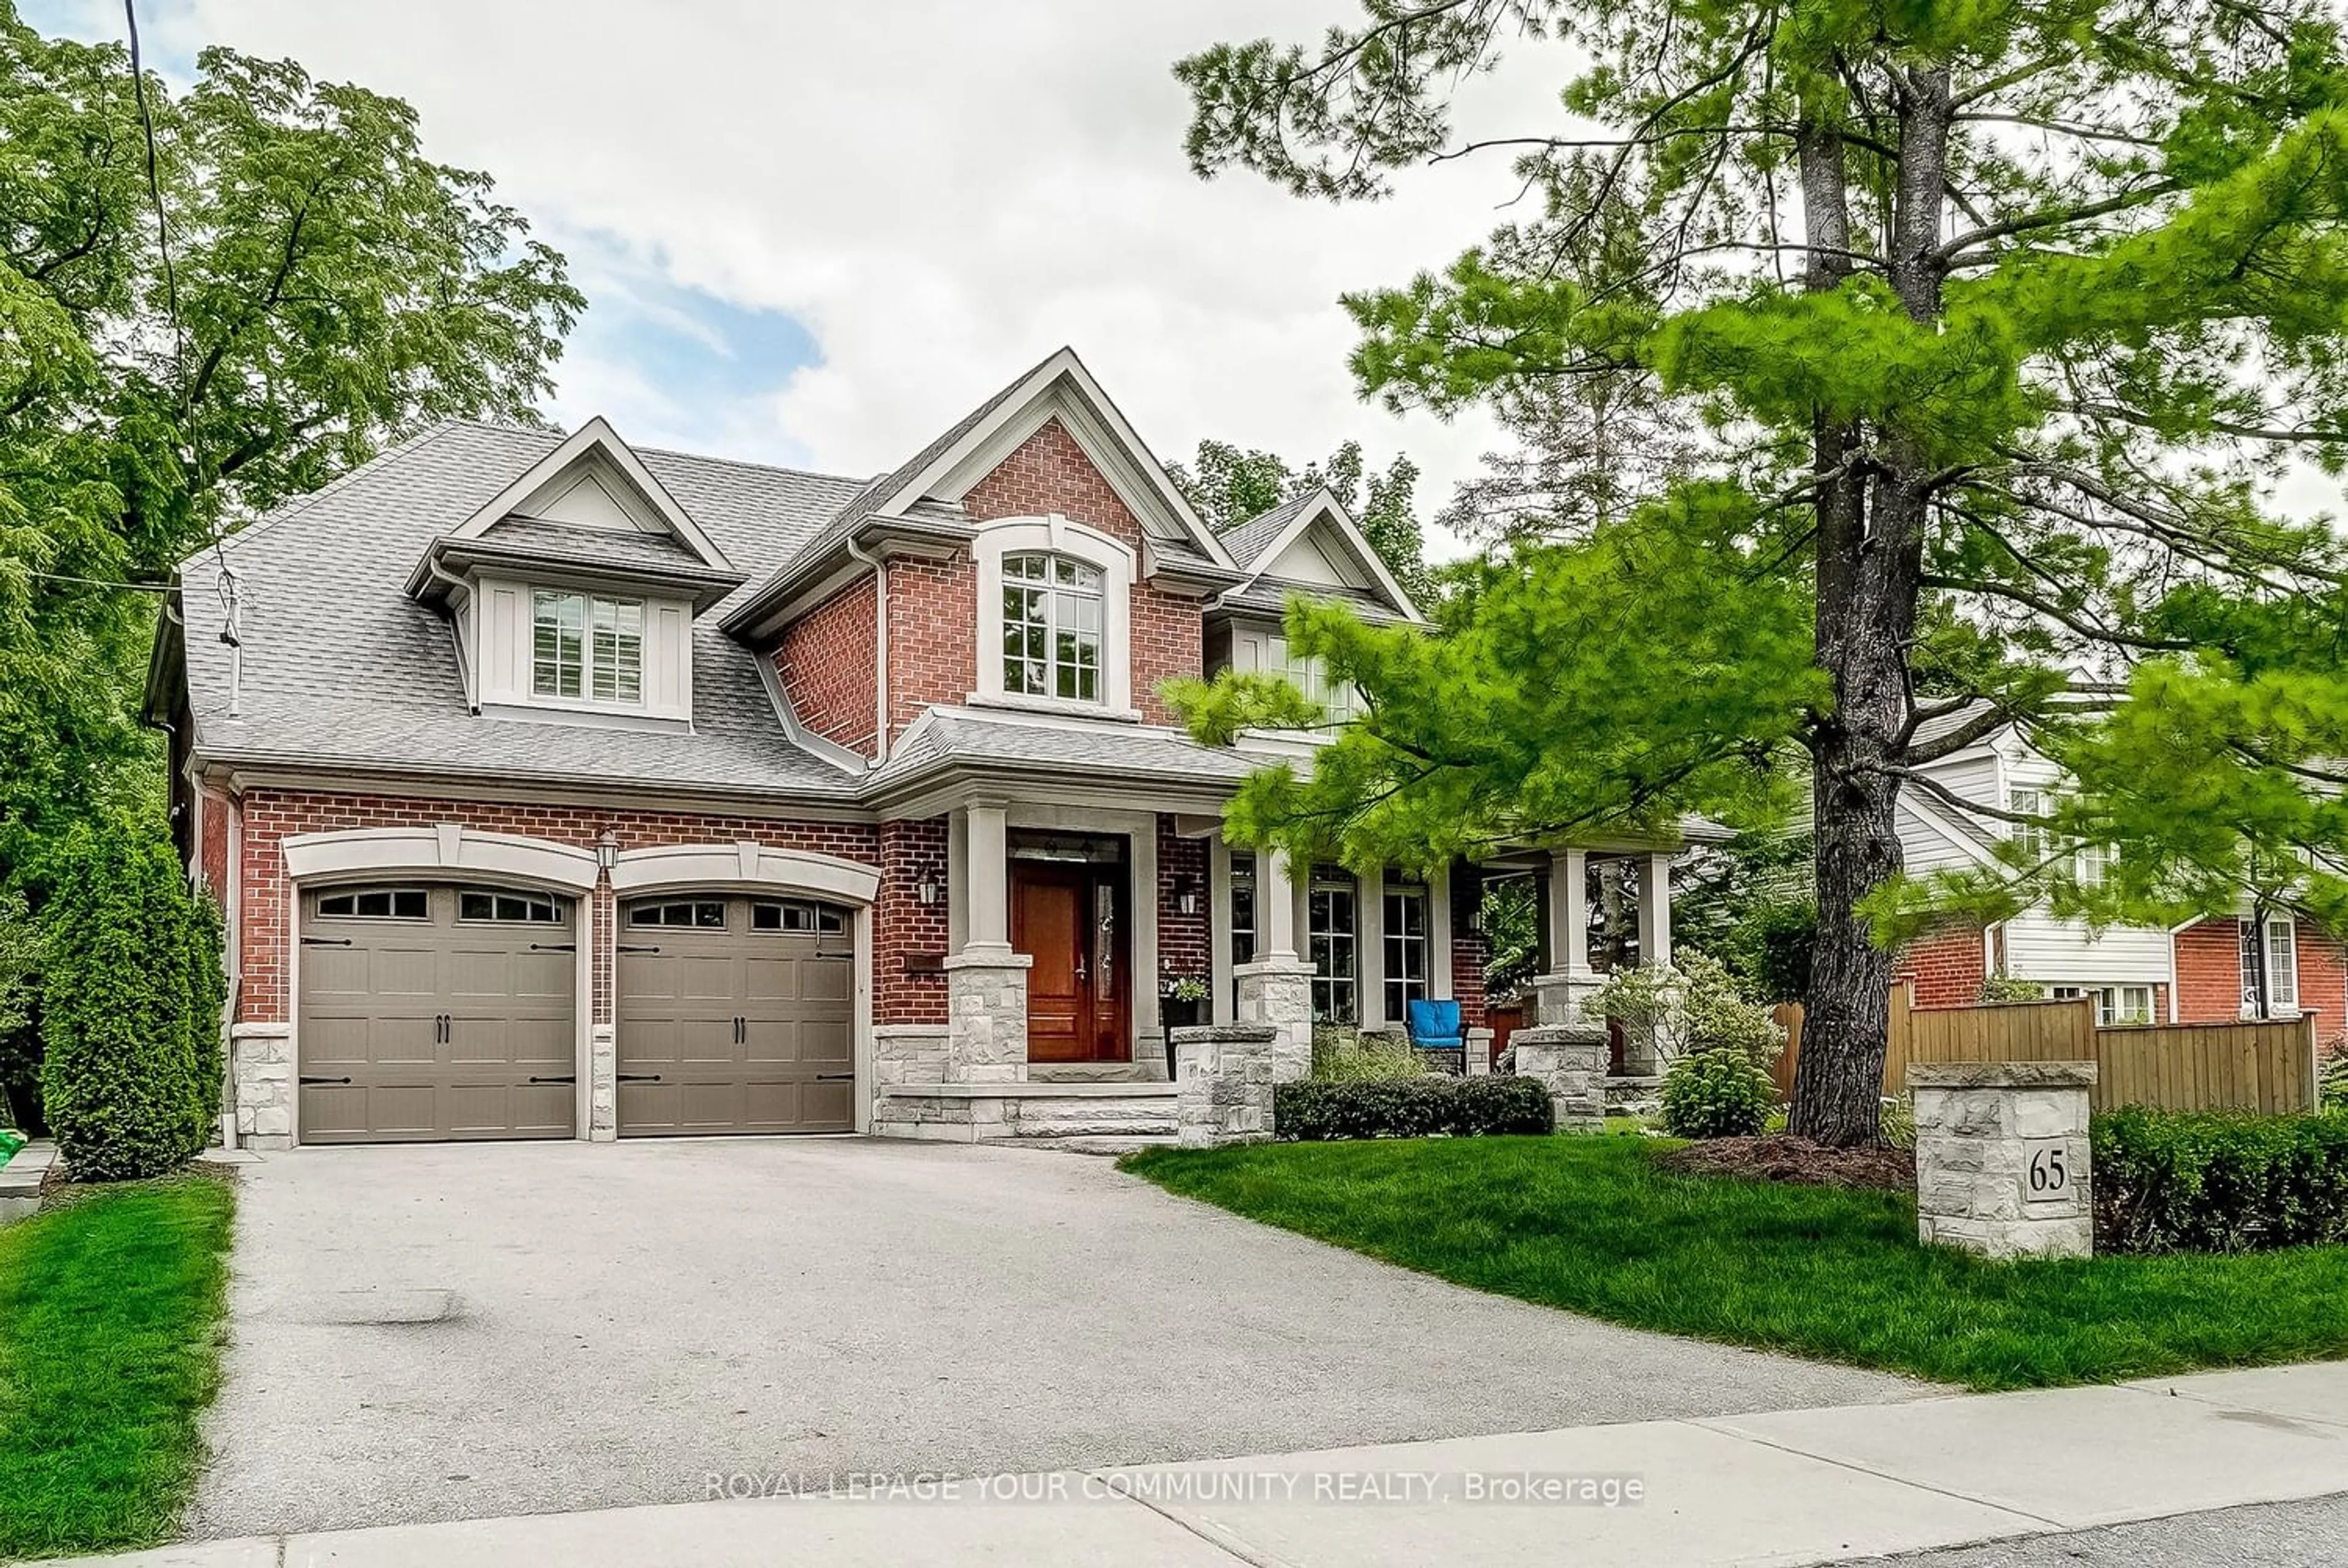 Home with brick exterior material for 65 Bridgeport St, Richmond Hill Ontario L4C 3V9